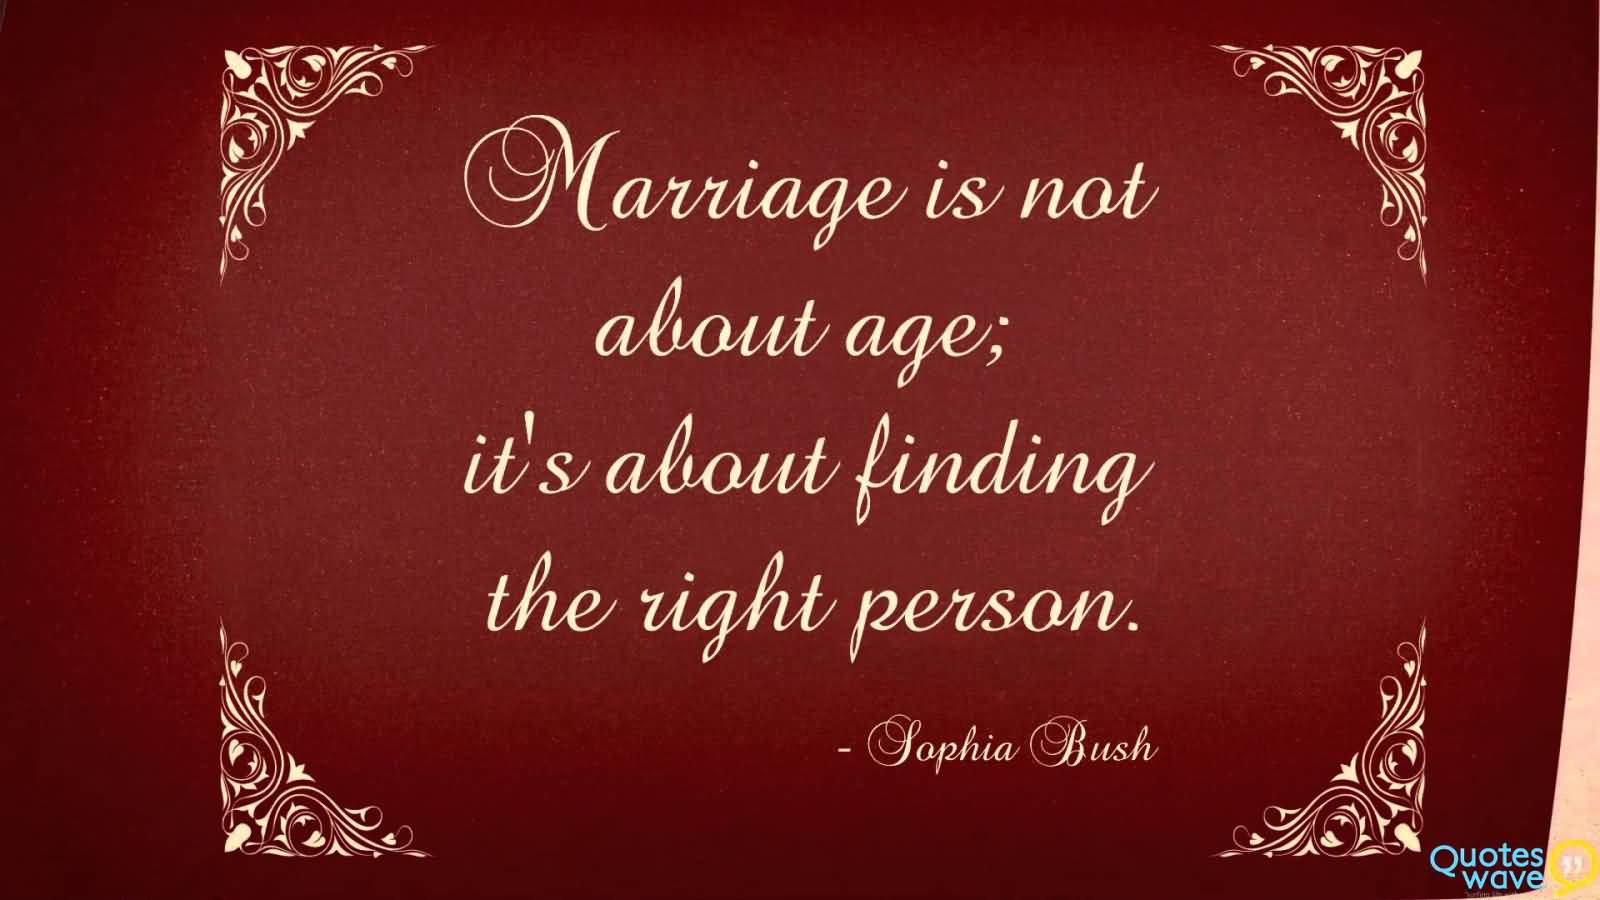 Marriage is not about age; it's about finding the right person. - Sophia Bush